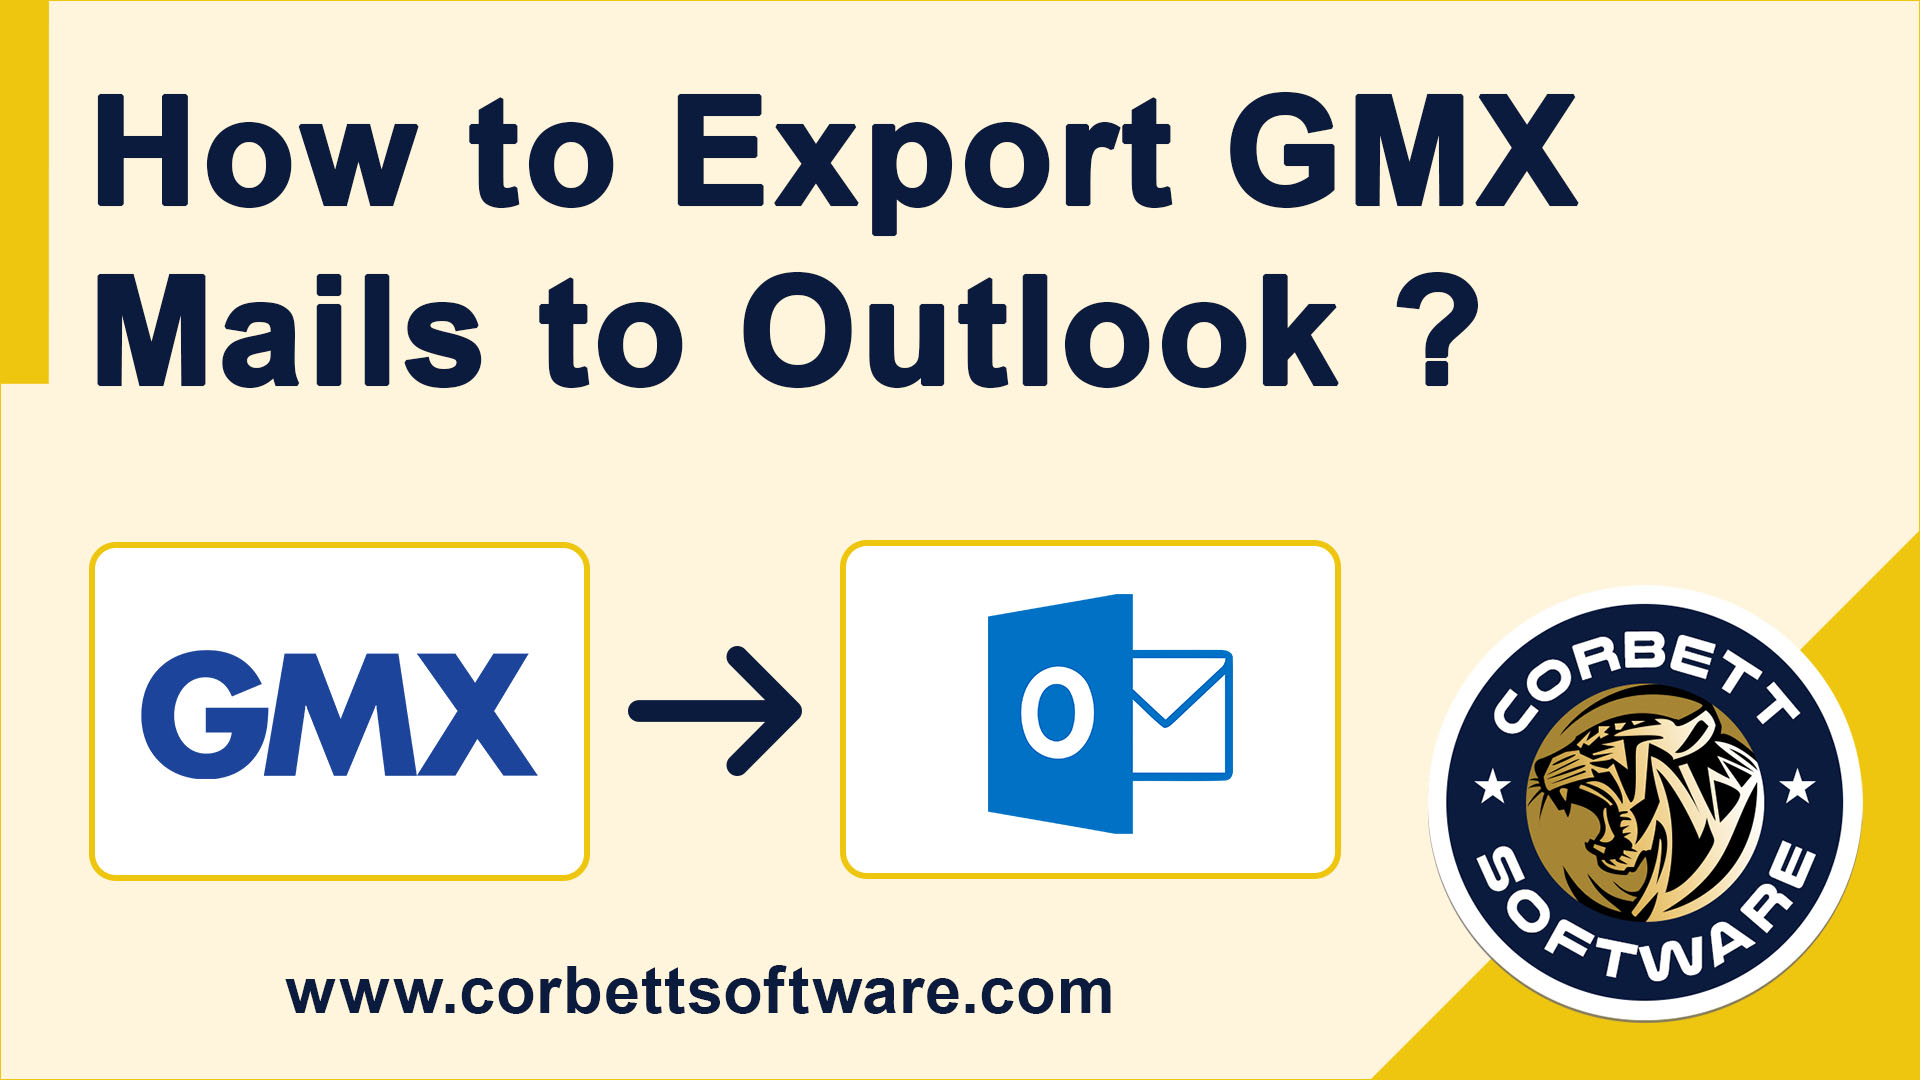 Export GMX mails to Outlook